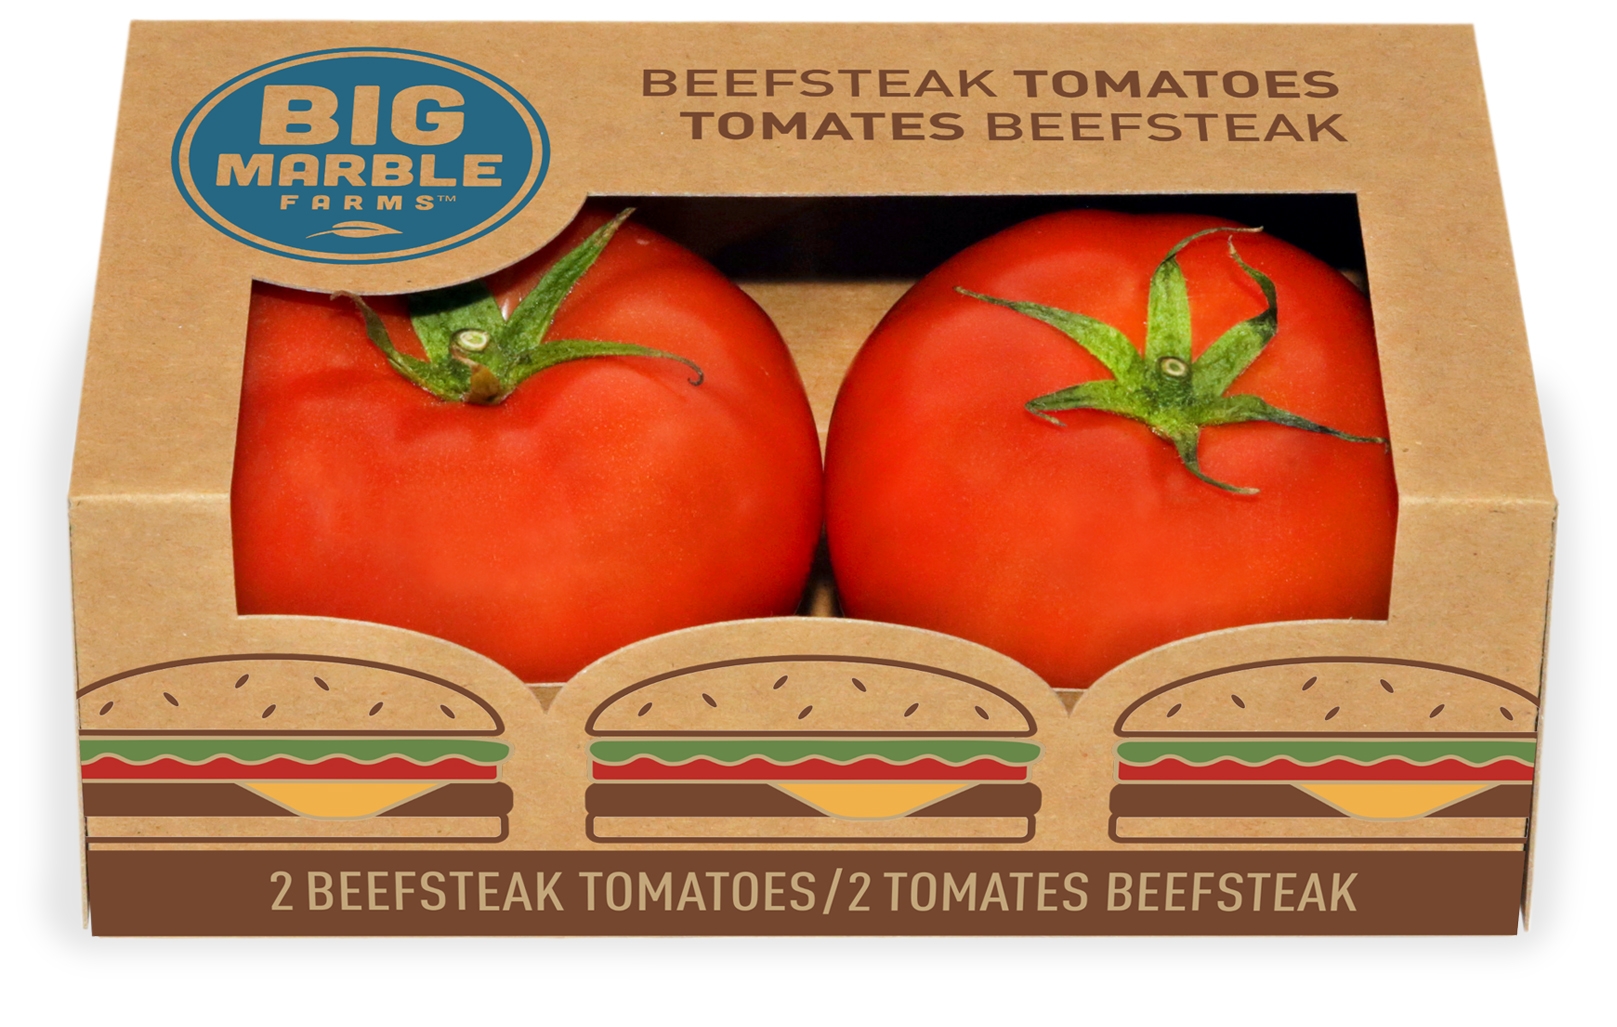 Two beef steak tomatoes in a box